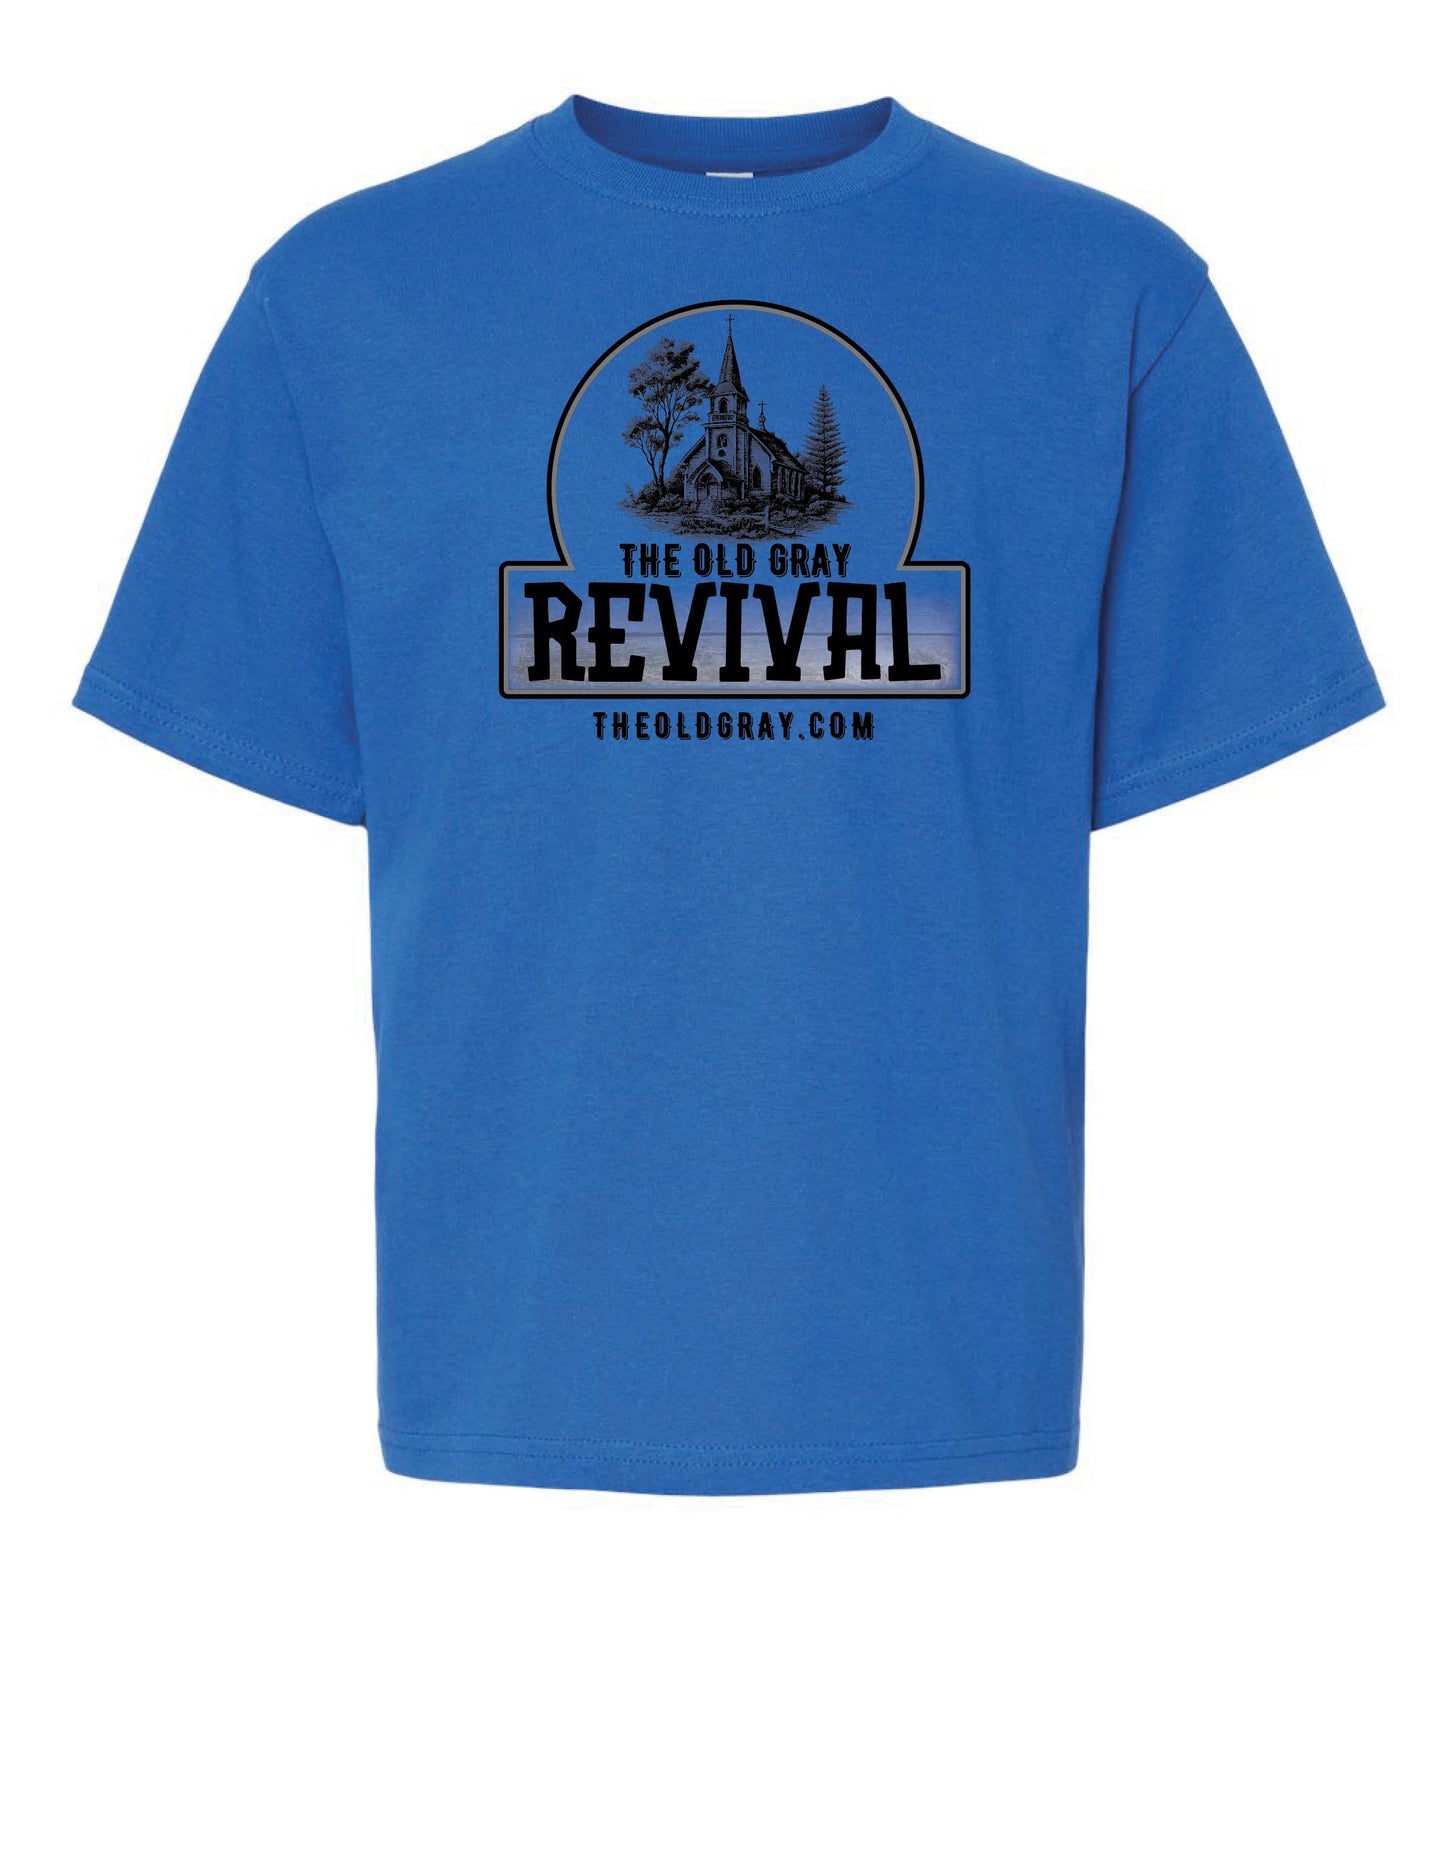 YOUTH - The Old Gray Revival T Shirt